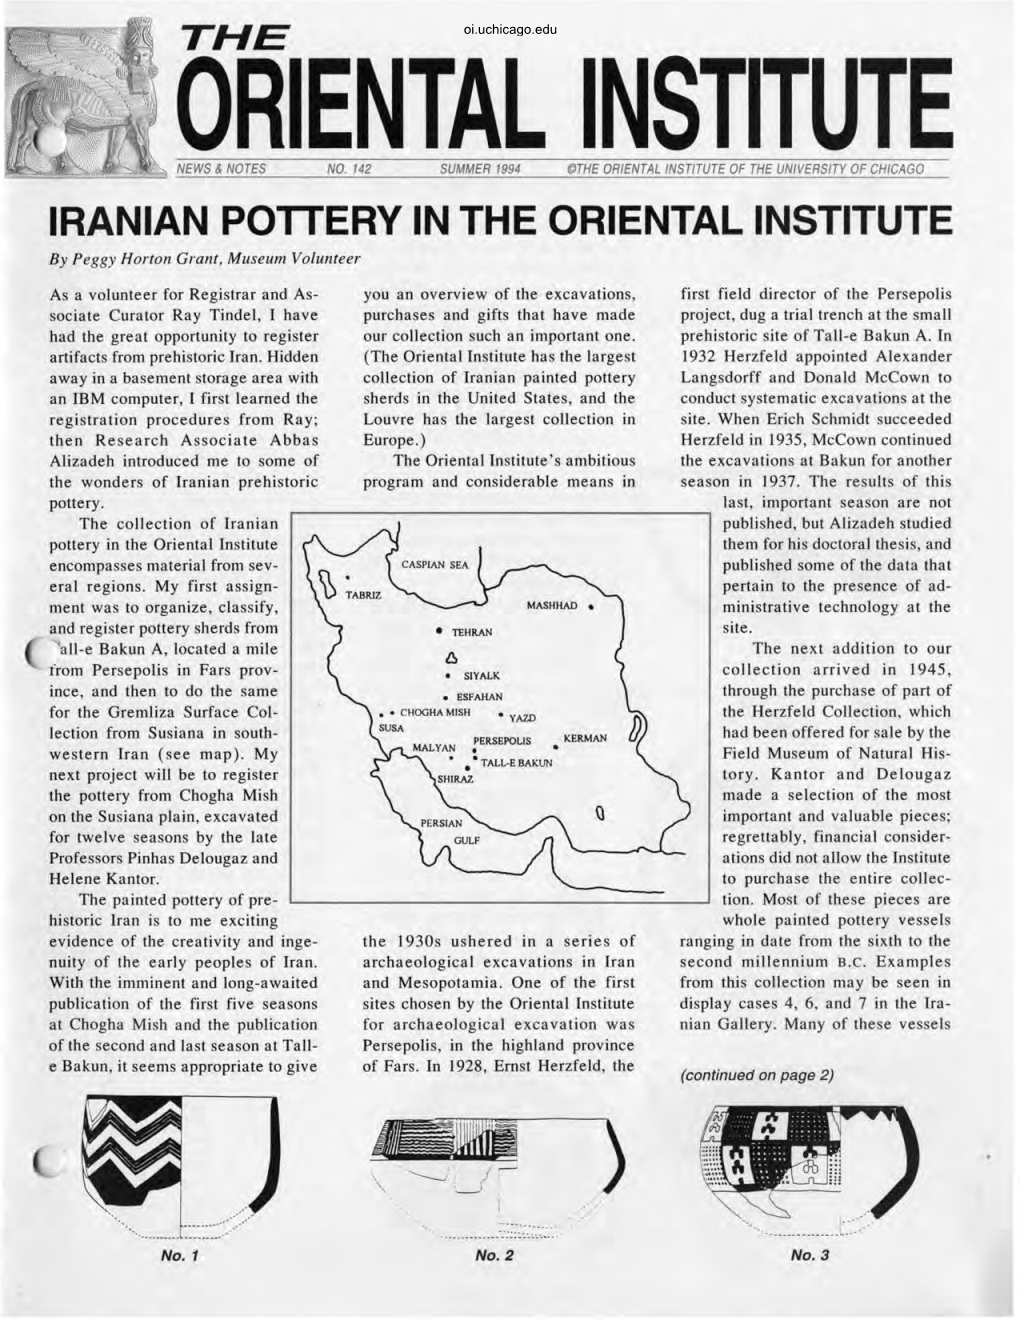 IRANIAN POTTERY in the ORIENTAL INSTITUTE by Peggy Horton Grant, Museum Volunteer